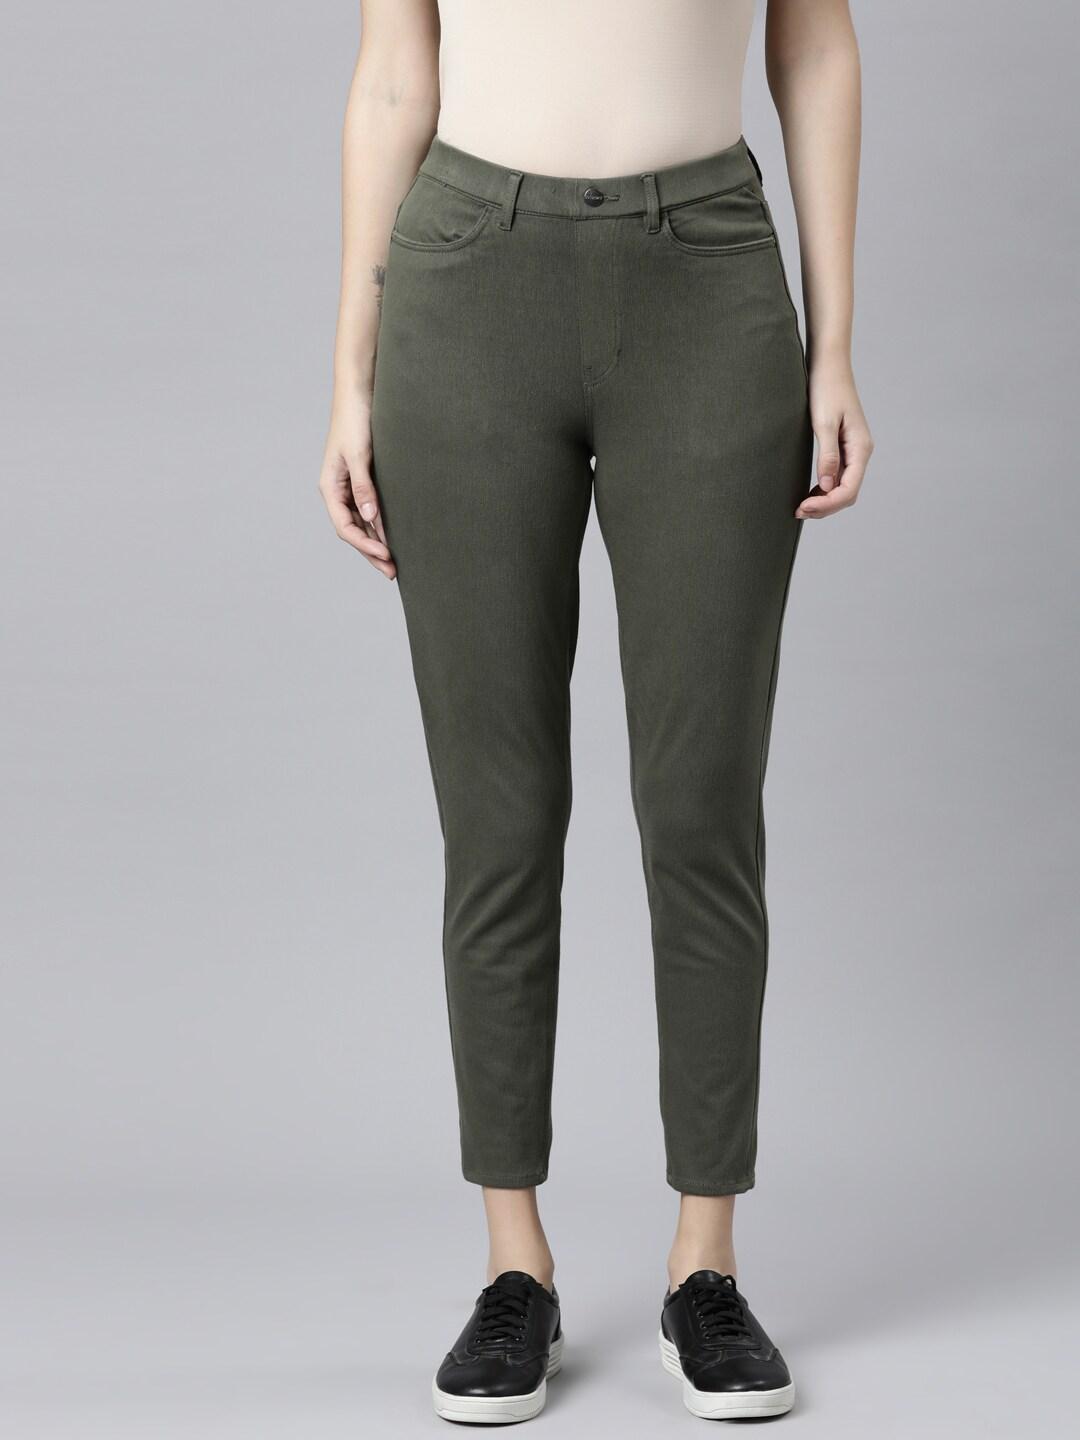 go-colors-women-olive-green-cotton-solid-slim-fit-jeggings